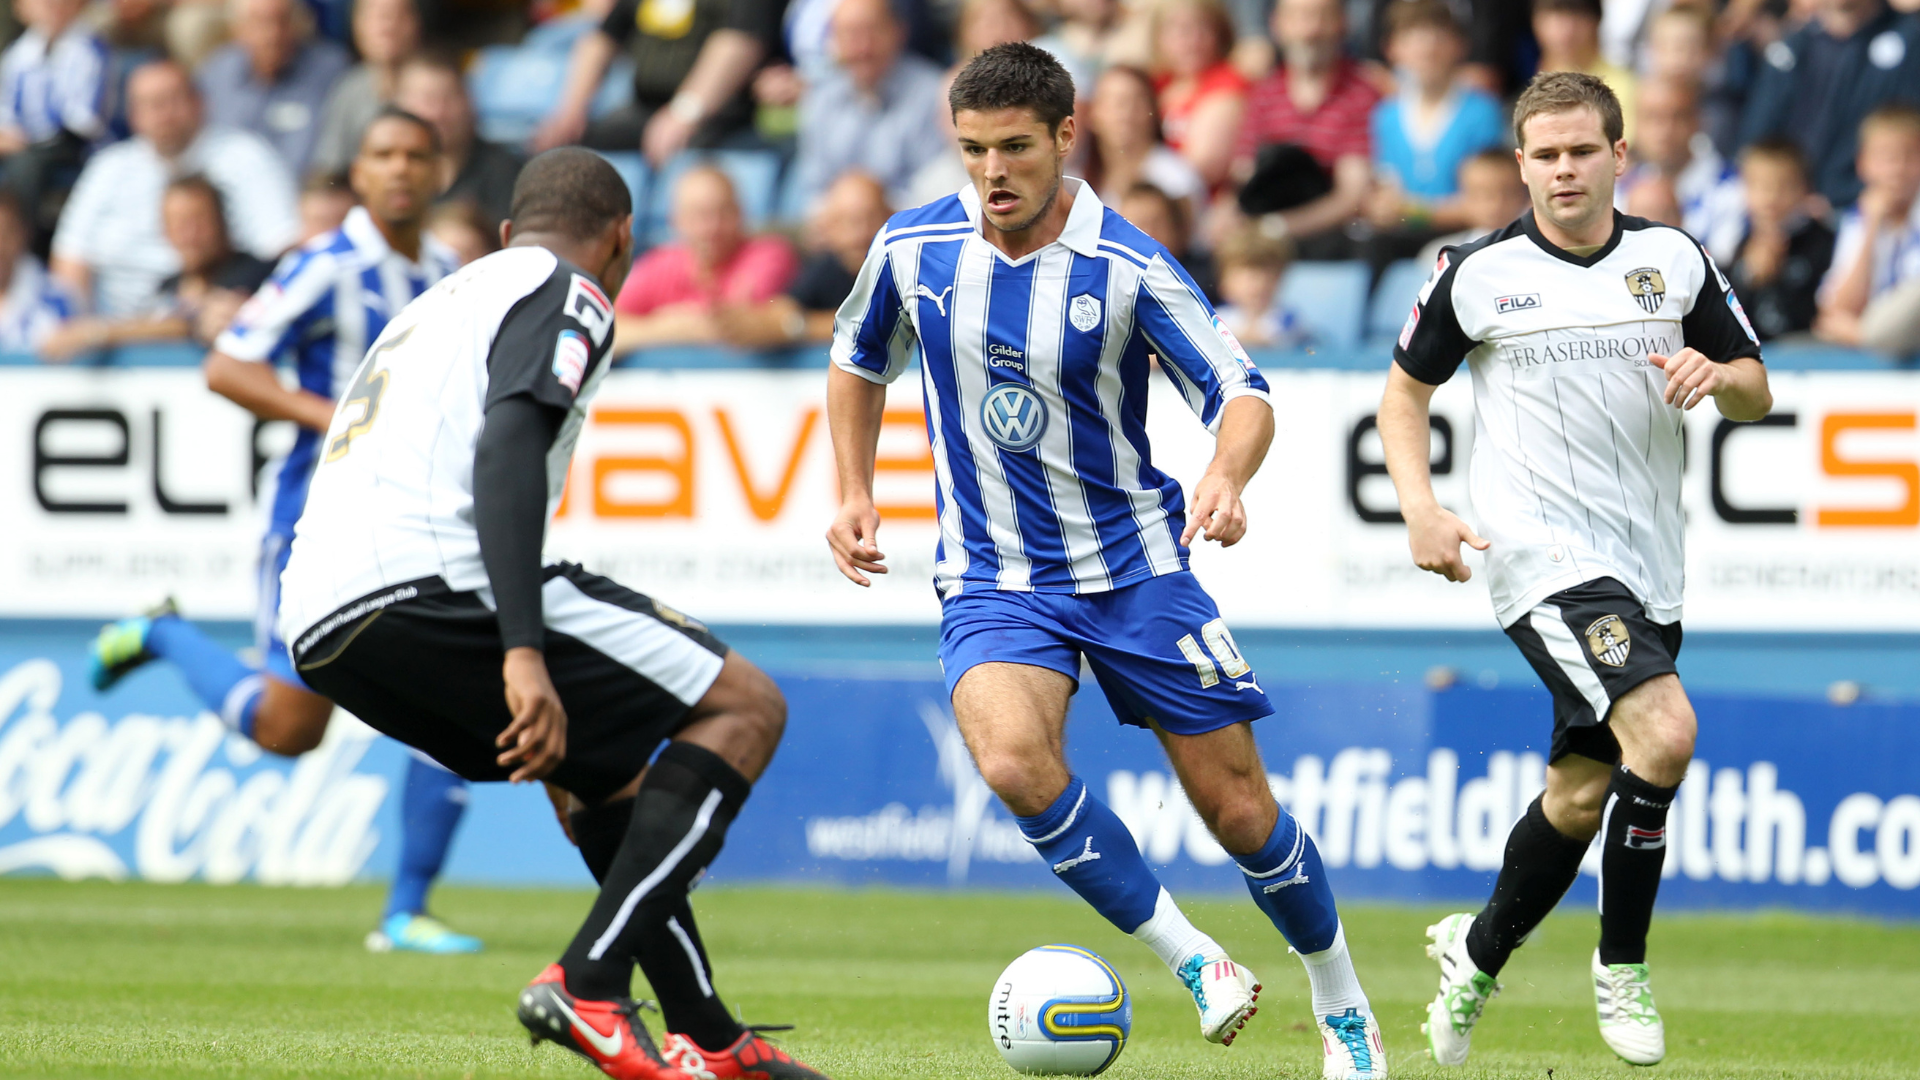 Winger Ben Marshall on loan at Sheffield Wednesday